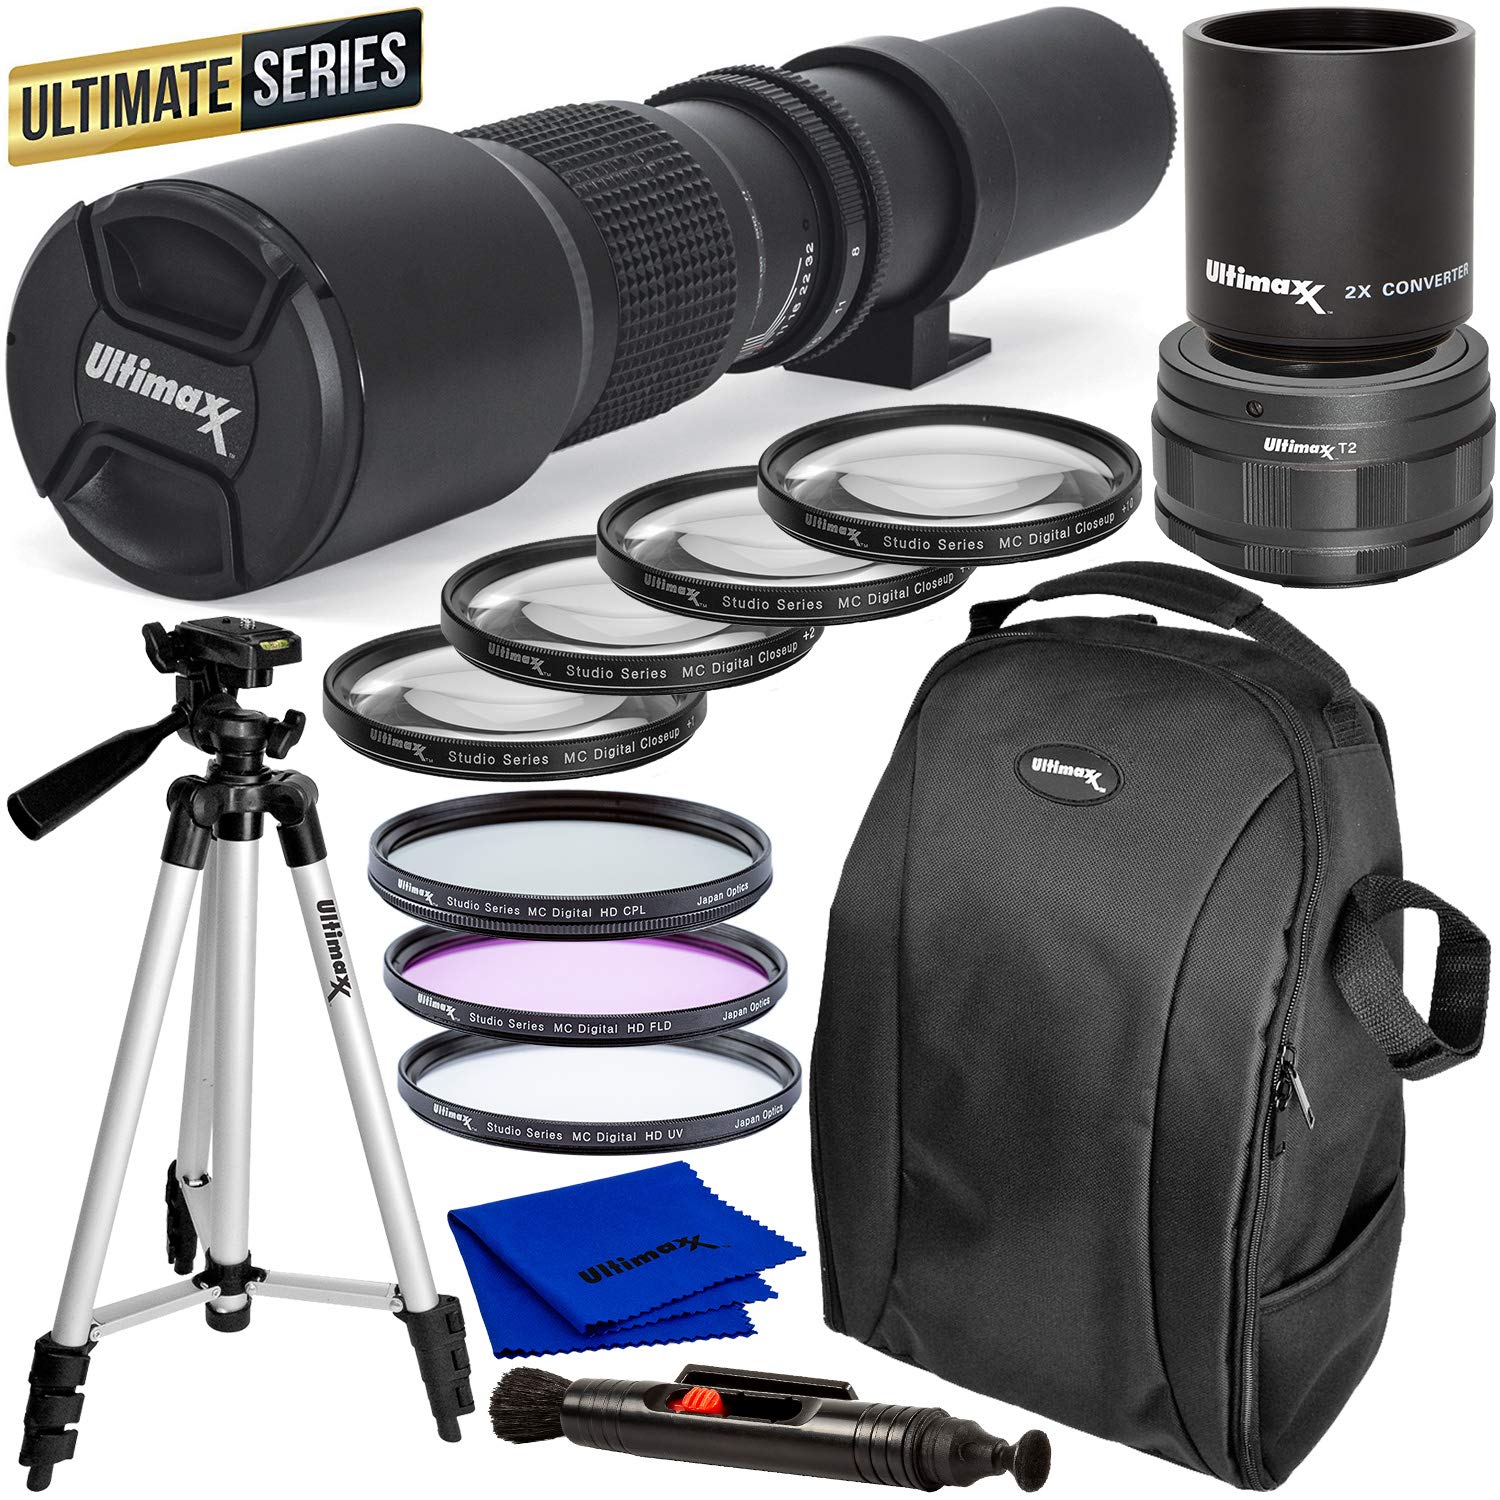 Ultimaxx High-Power 500mm/1000mm f/8 Manual Lens for Canon RF-Mount Mirrorless Cameras and Accessory Bundle